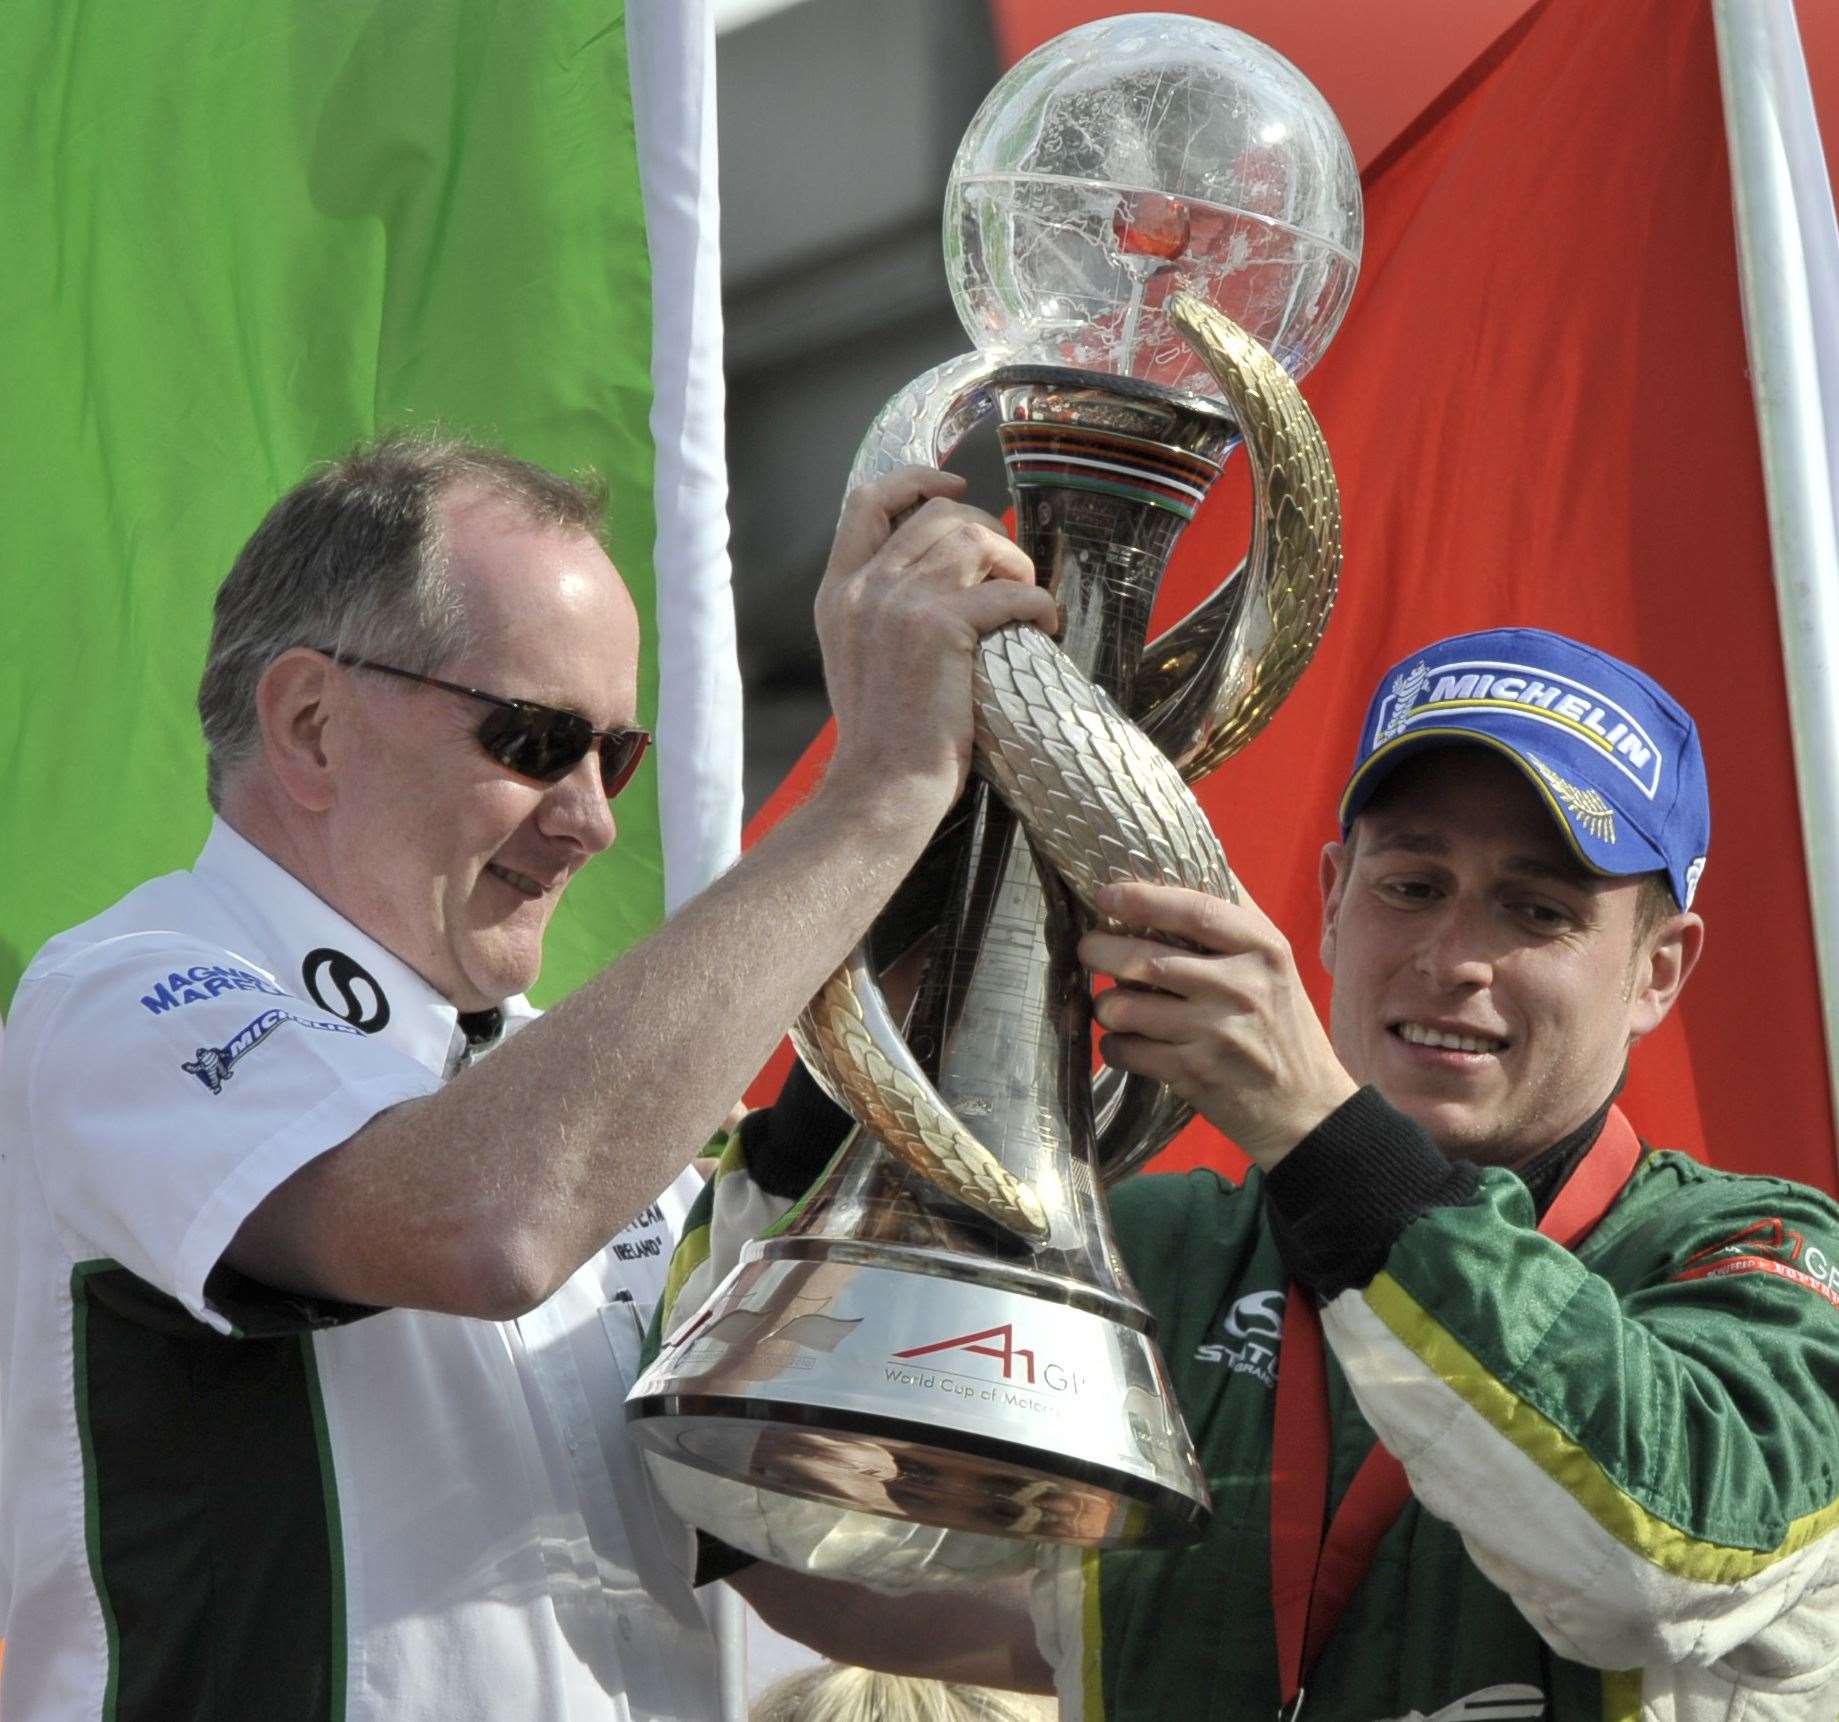 Adam Carroll dominated the final round at Brands Hatch in 2009 to win the championship for Team Ireland. He is pictured here with the squad's seat holder Mark Gallagher. Picture: Andy Payton